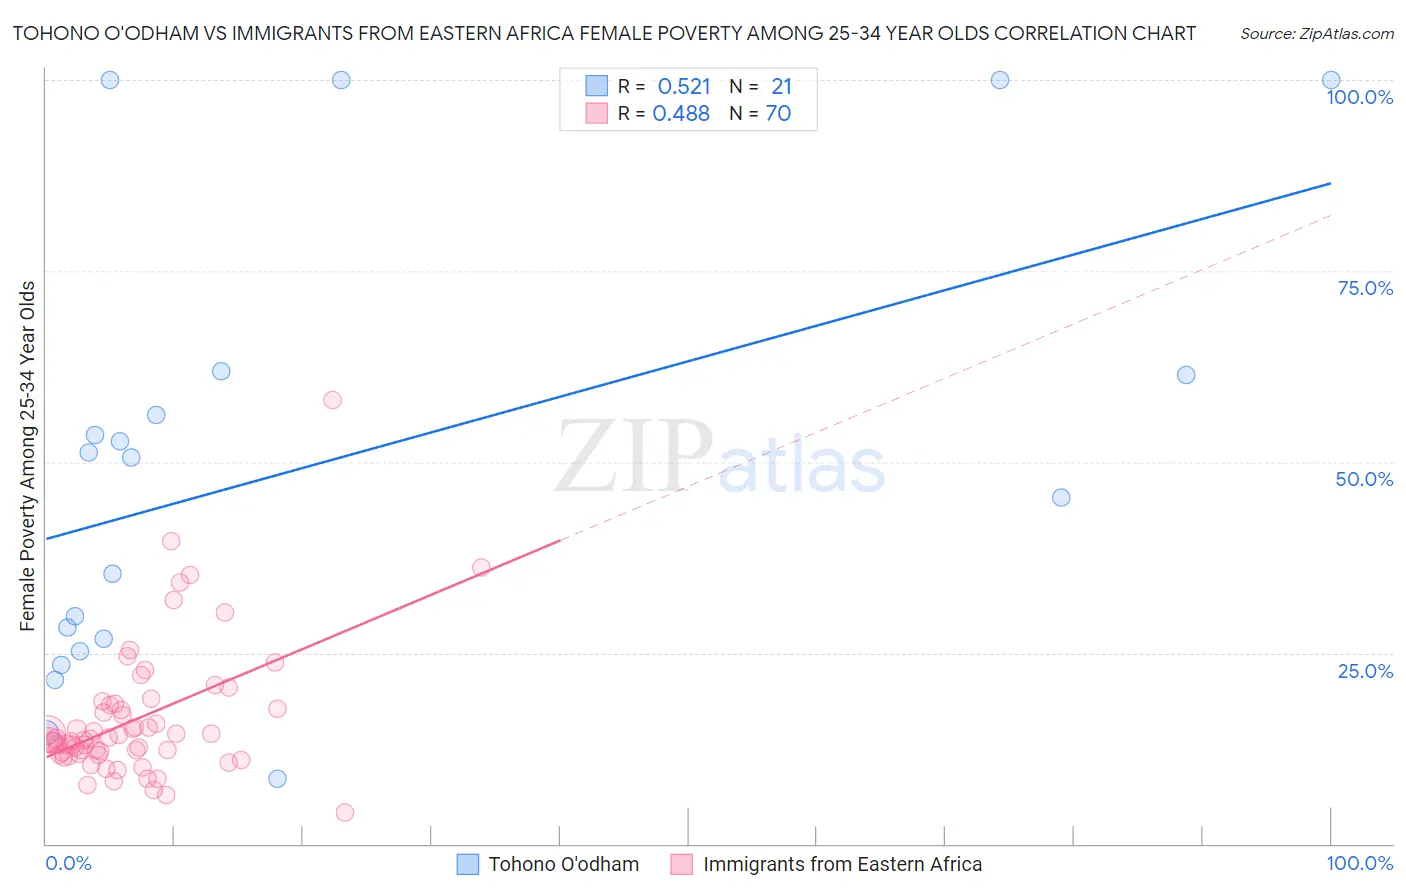 Tohono O'odham vs Immigrants from Eastern Africa Female Poverty Among 25-34 Year Olds